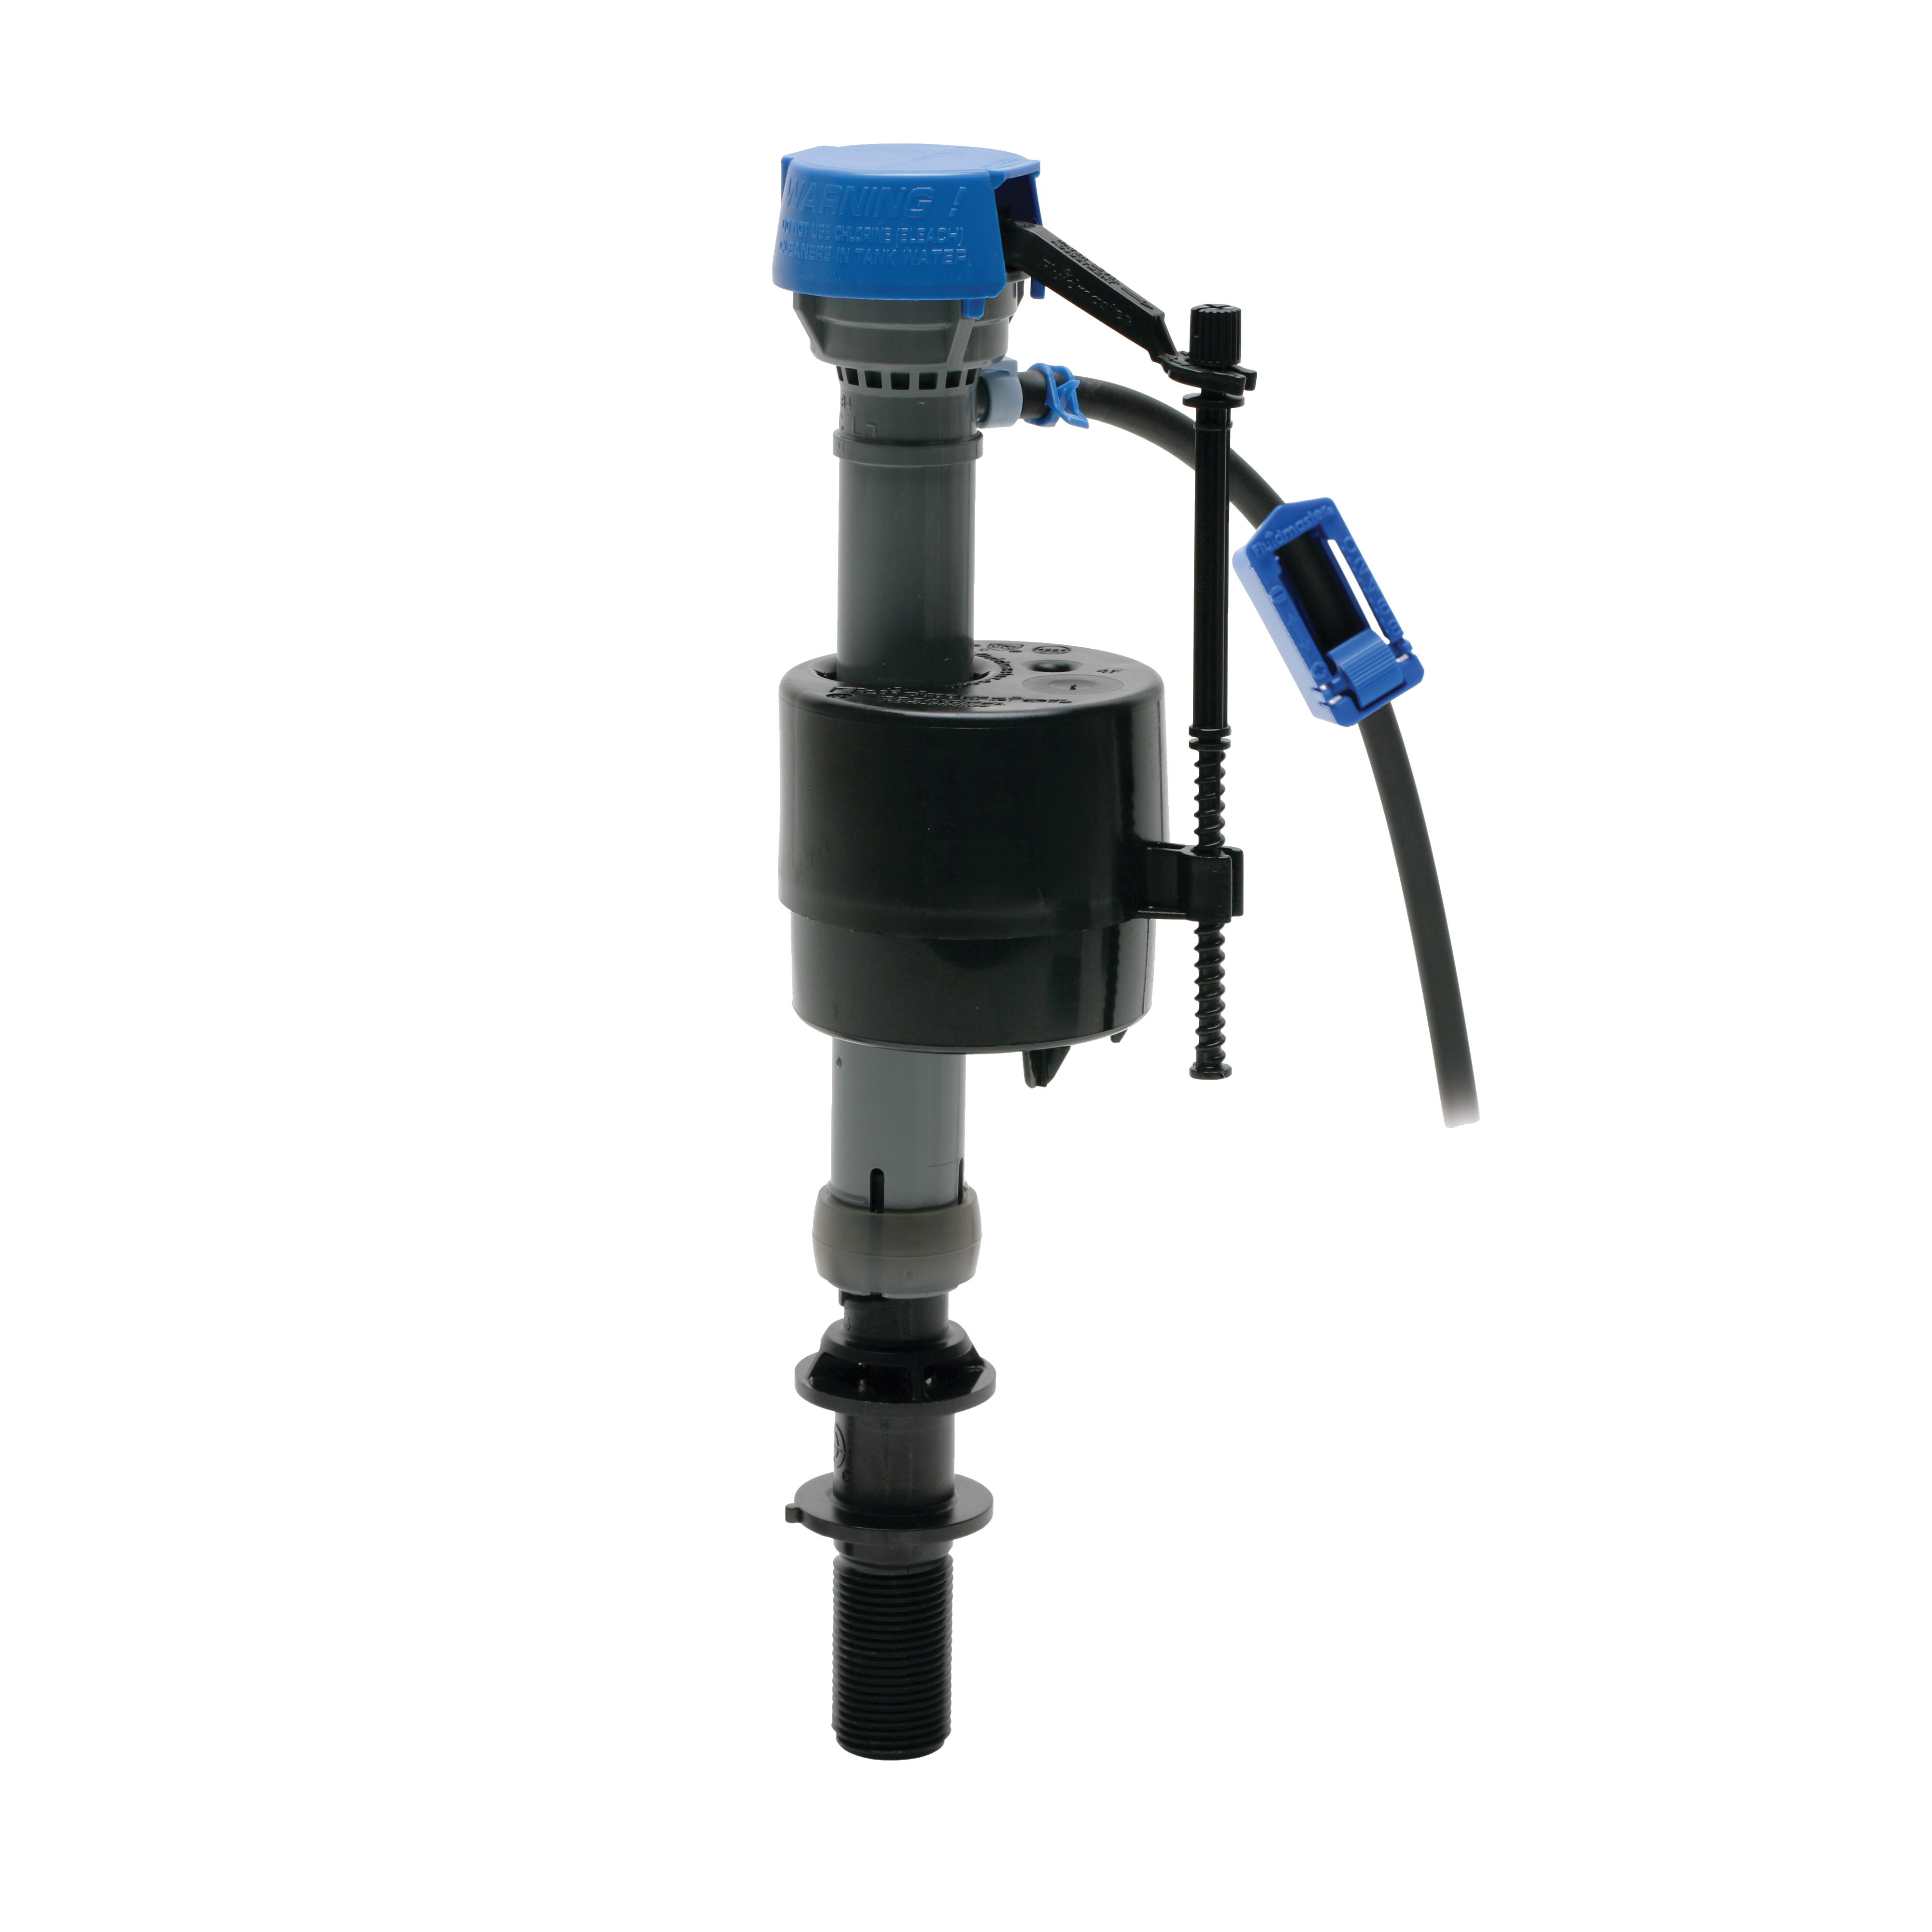 Fluidmaster PerforMAX Series 400ARHR Toilet Fill Valve, 10 to 15 in Connection, Plastic Body, Anti-Siphon: Yes - 1